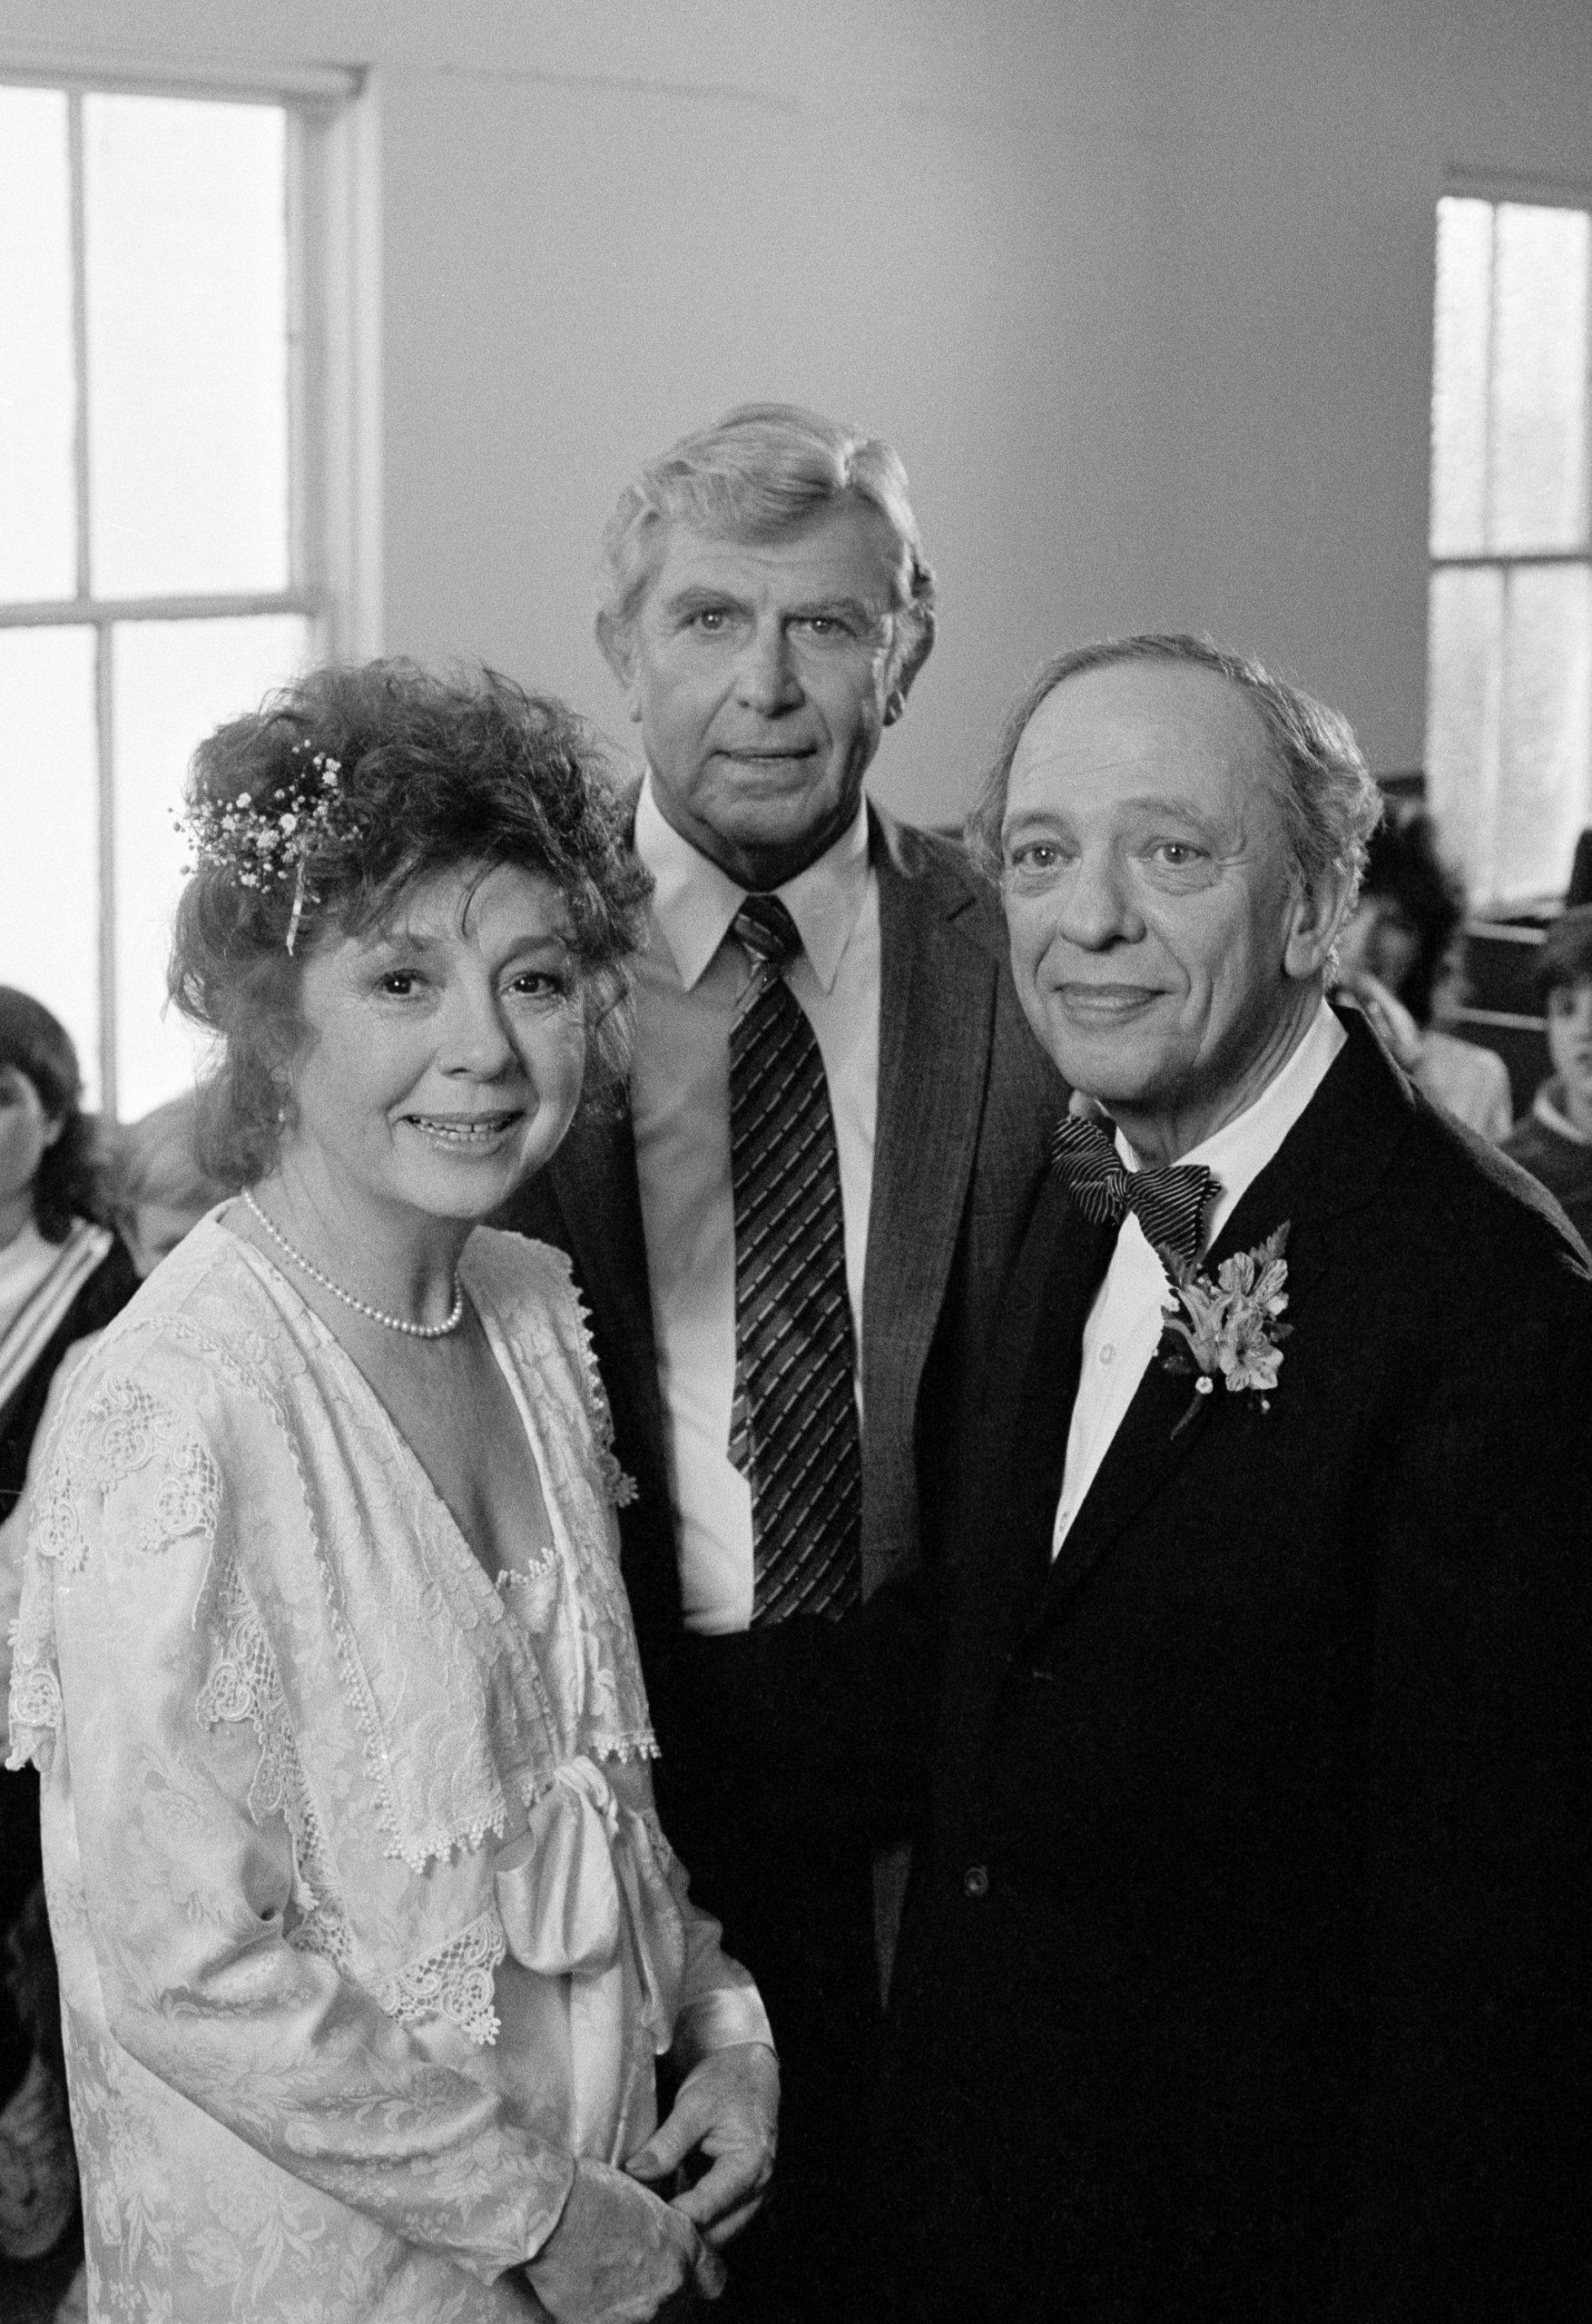 (left to right): Betty Lynn, Andy Griffith, and Don Knotts on the set of 'The Andy Griffith Show' reunion television movie, 'Return to Mayberry' in 1986.